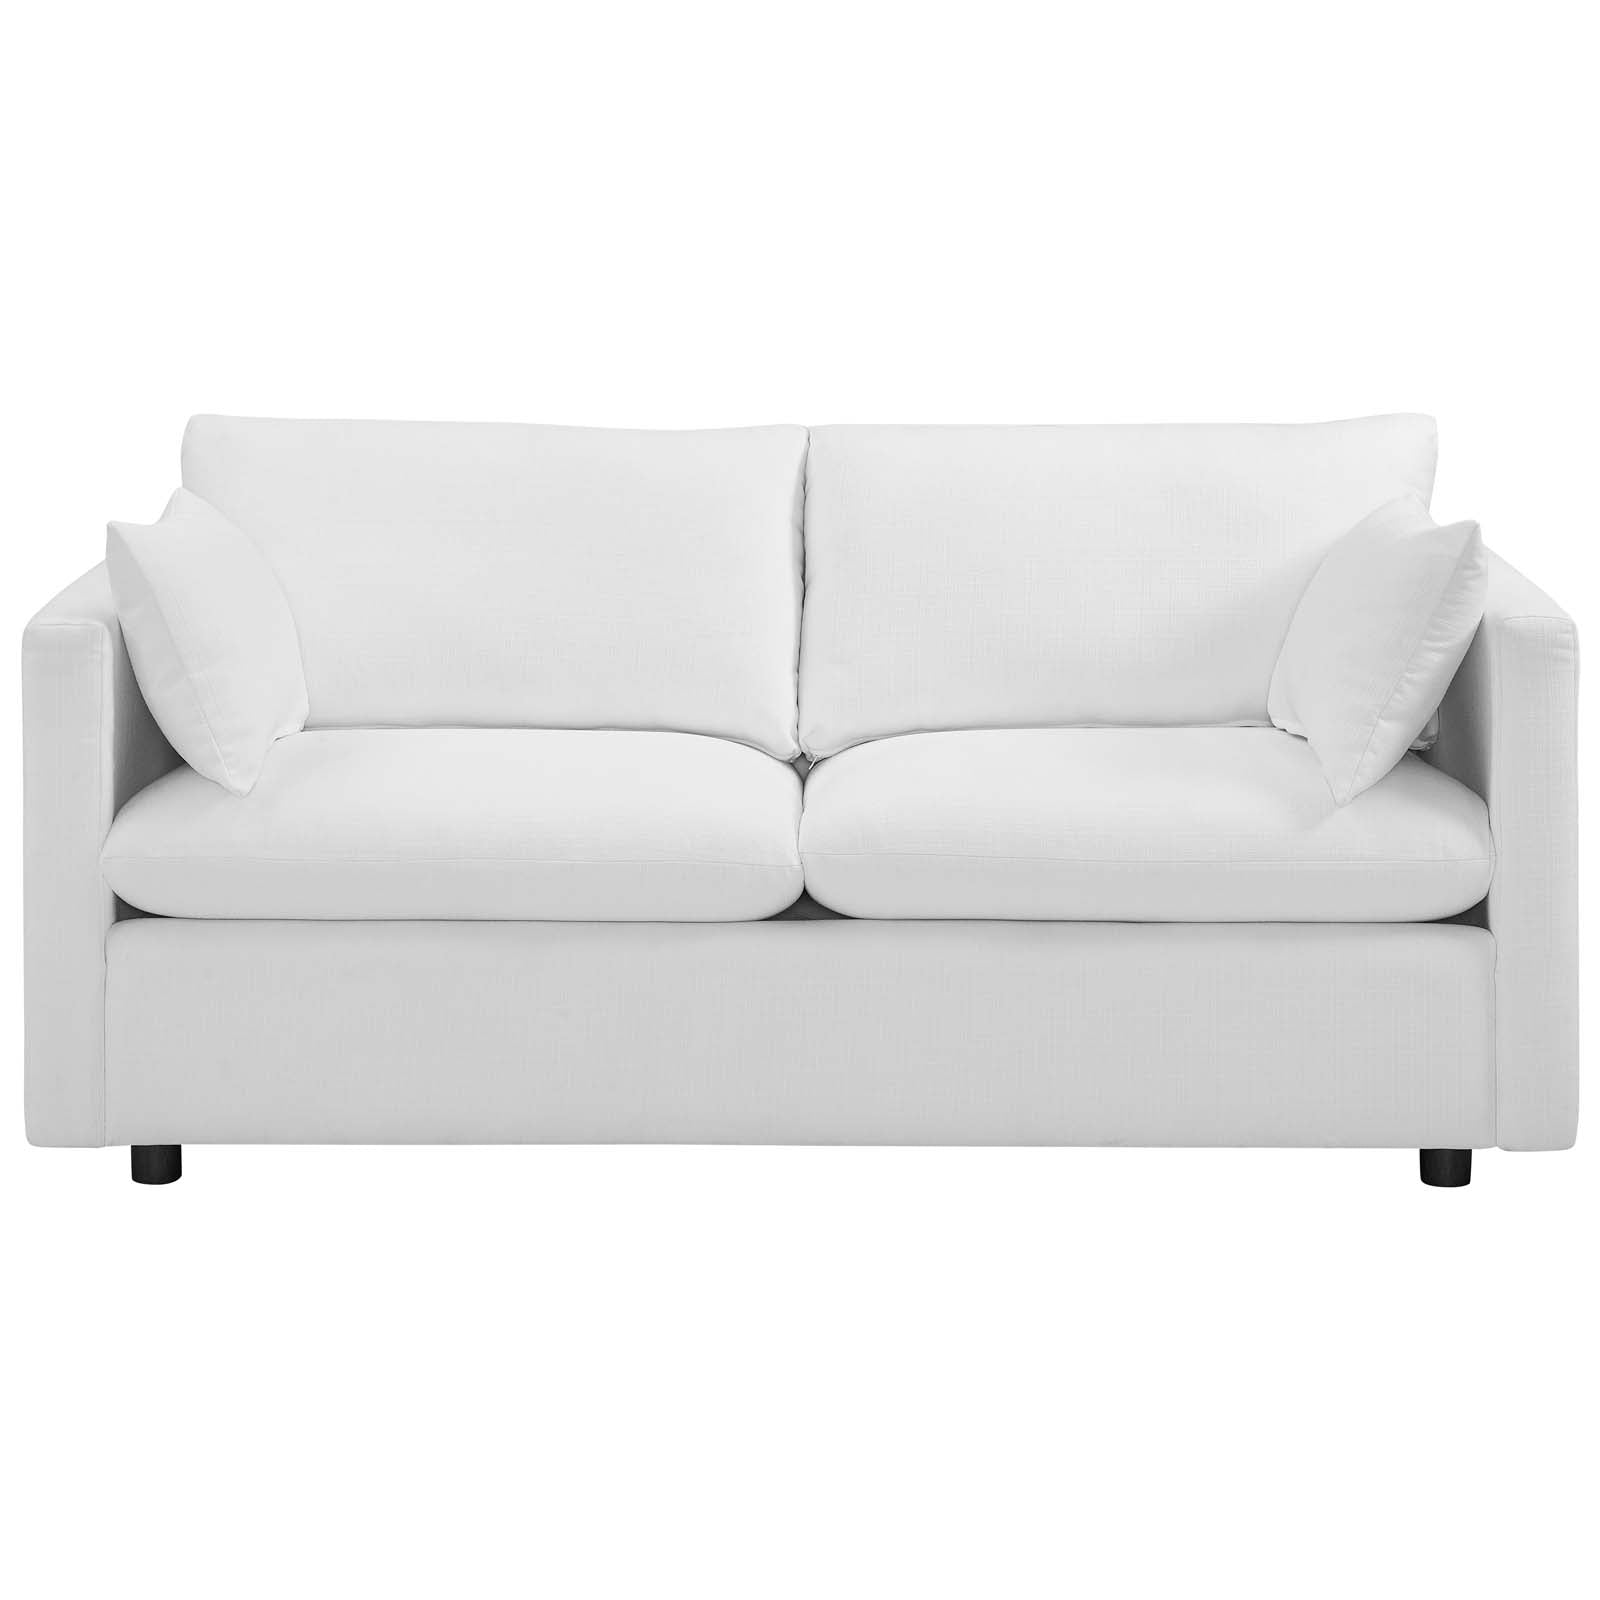 Activate Upholstered Fabric Sofa - East Shore Modern Home Furnishings